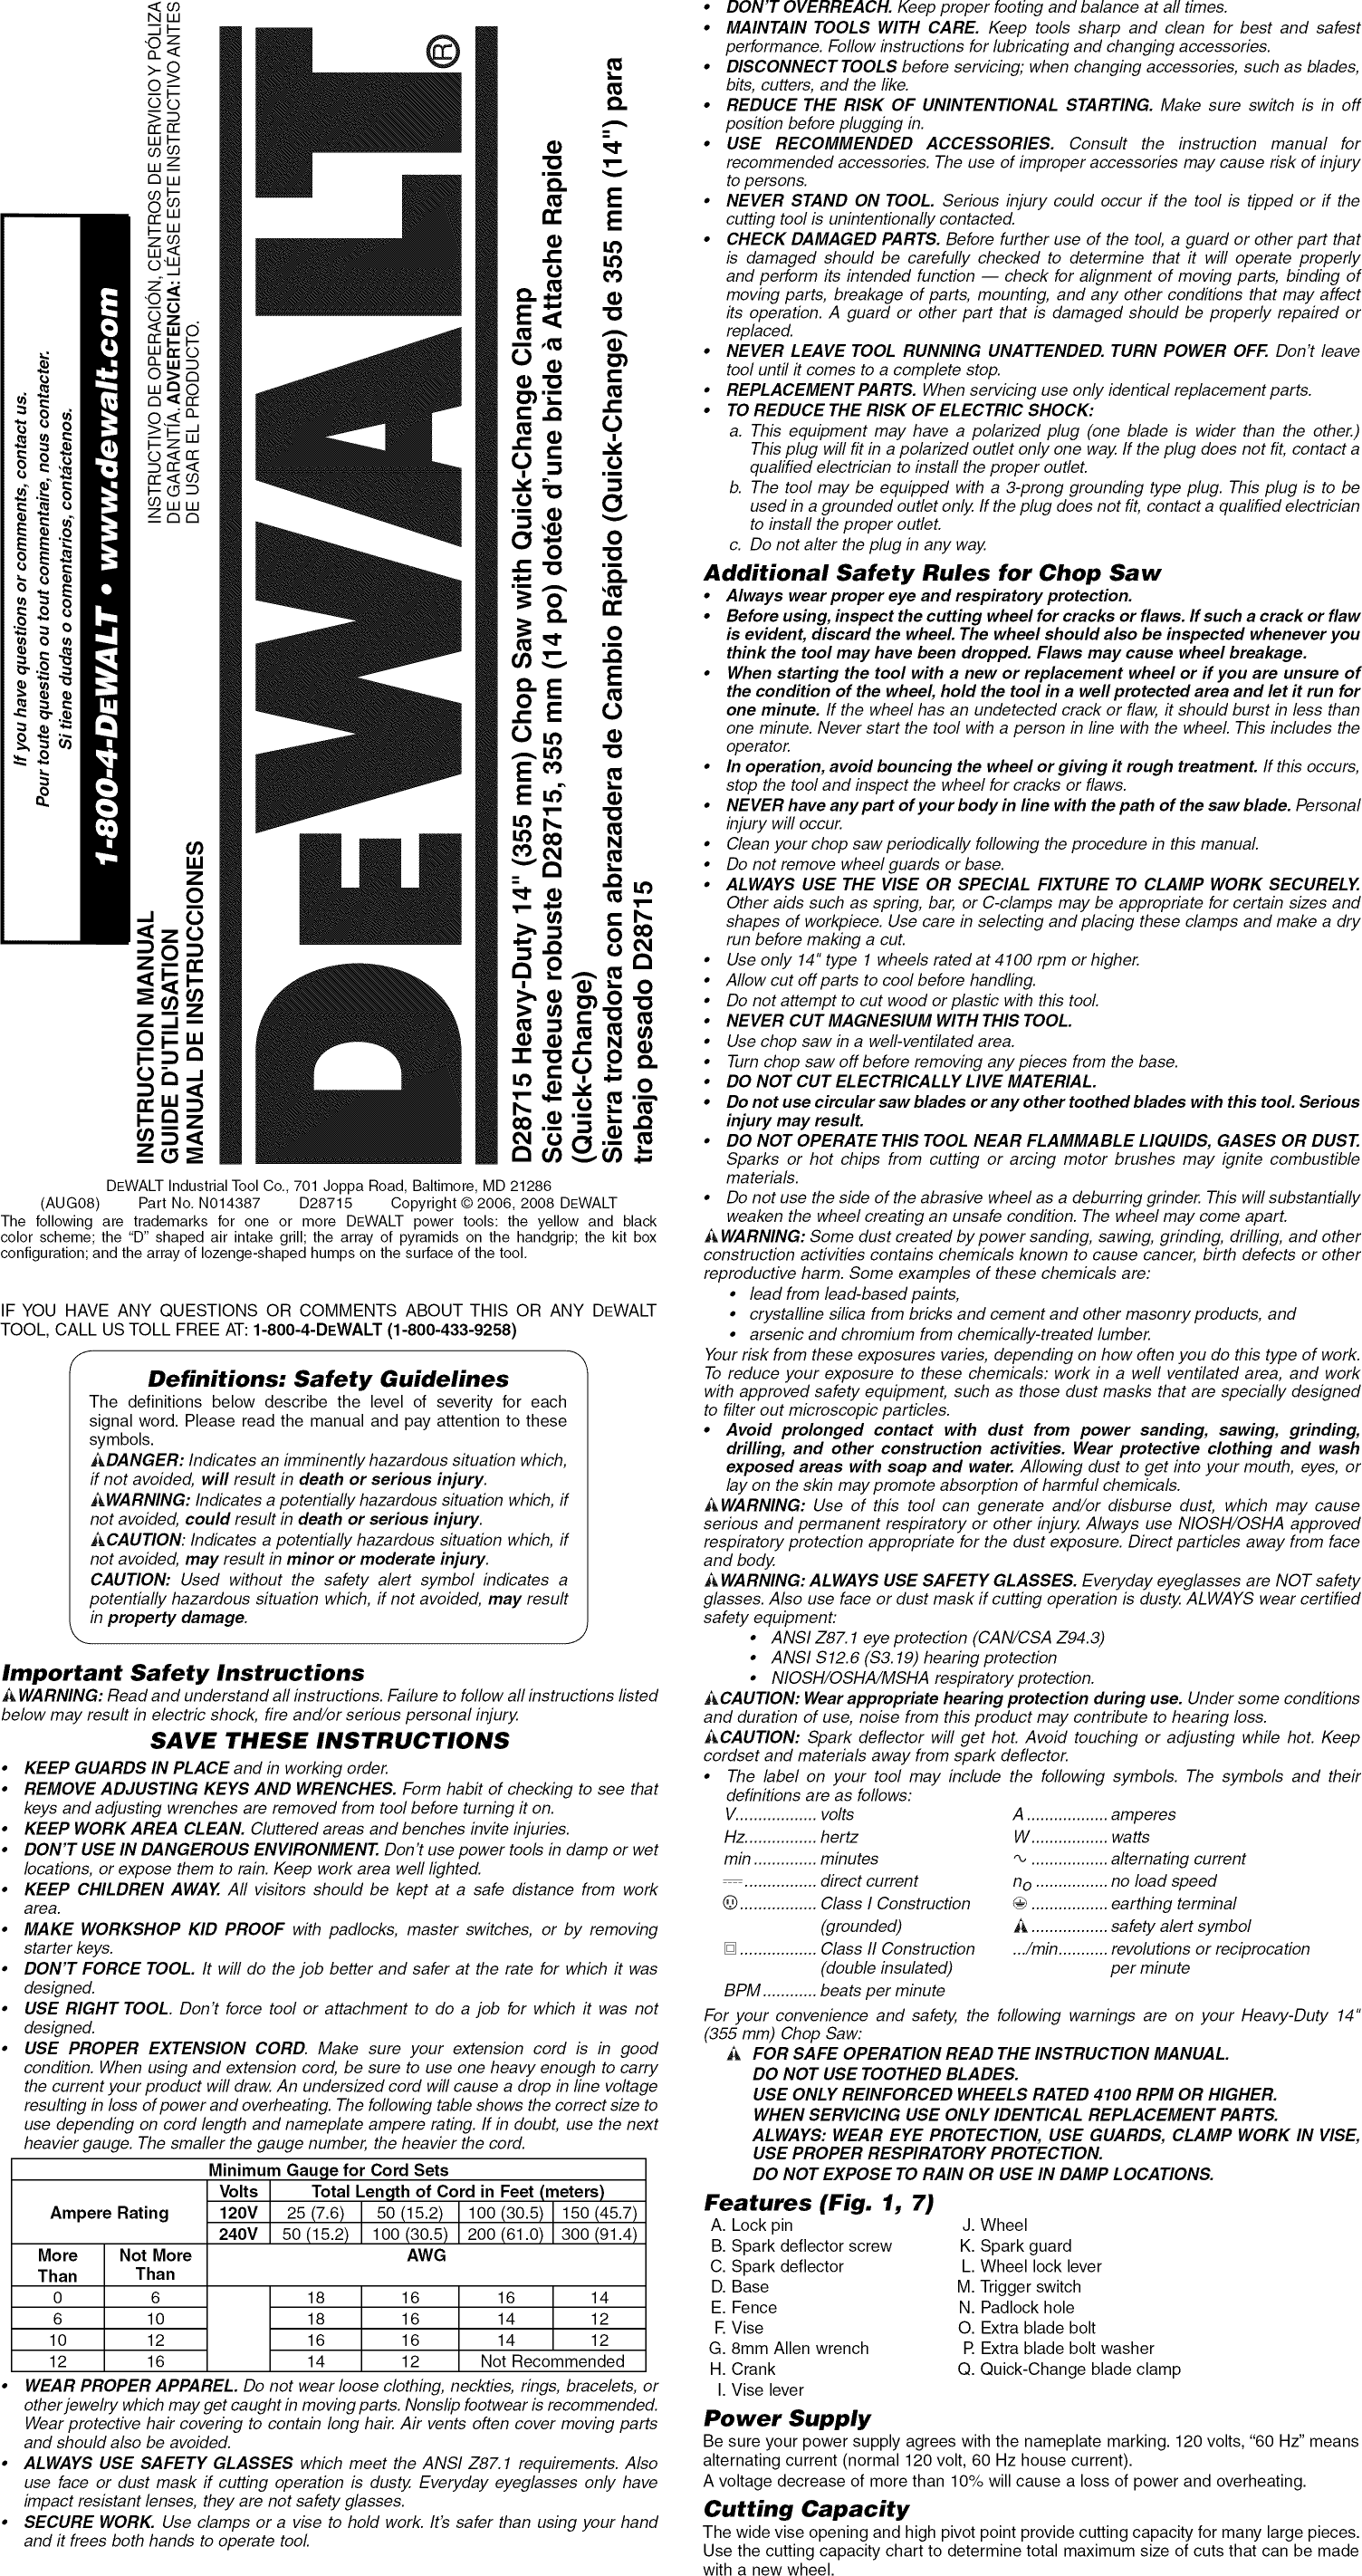 Page 1 of 7 - Dewalt D28715 TYPE1 User Manual  SAW CHOP - Manuals And Guides 1301208L